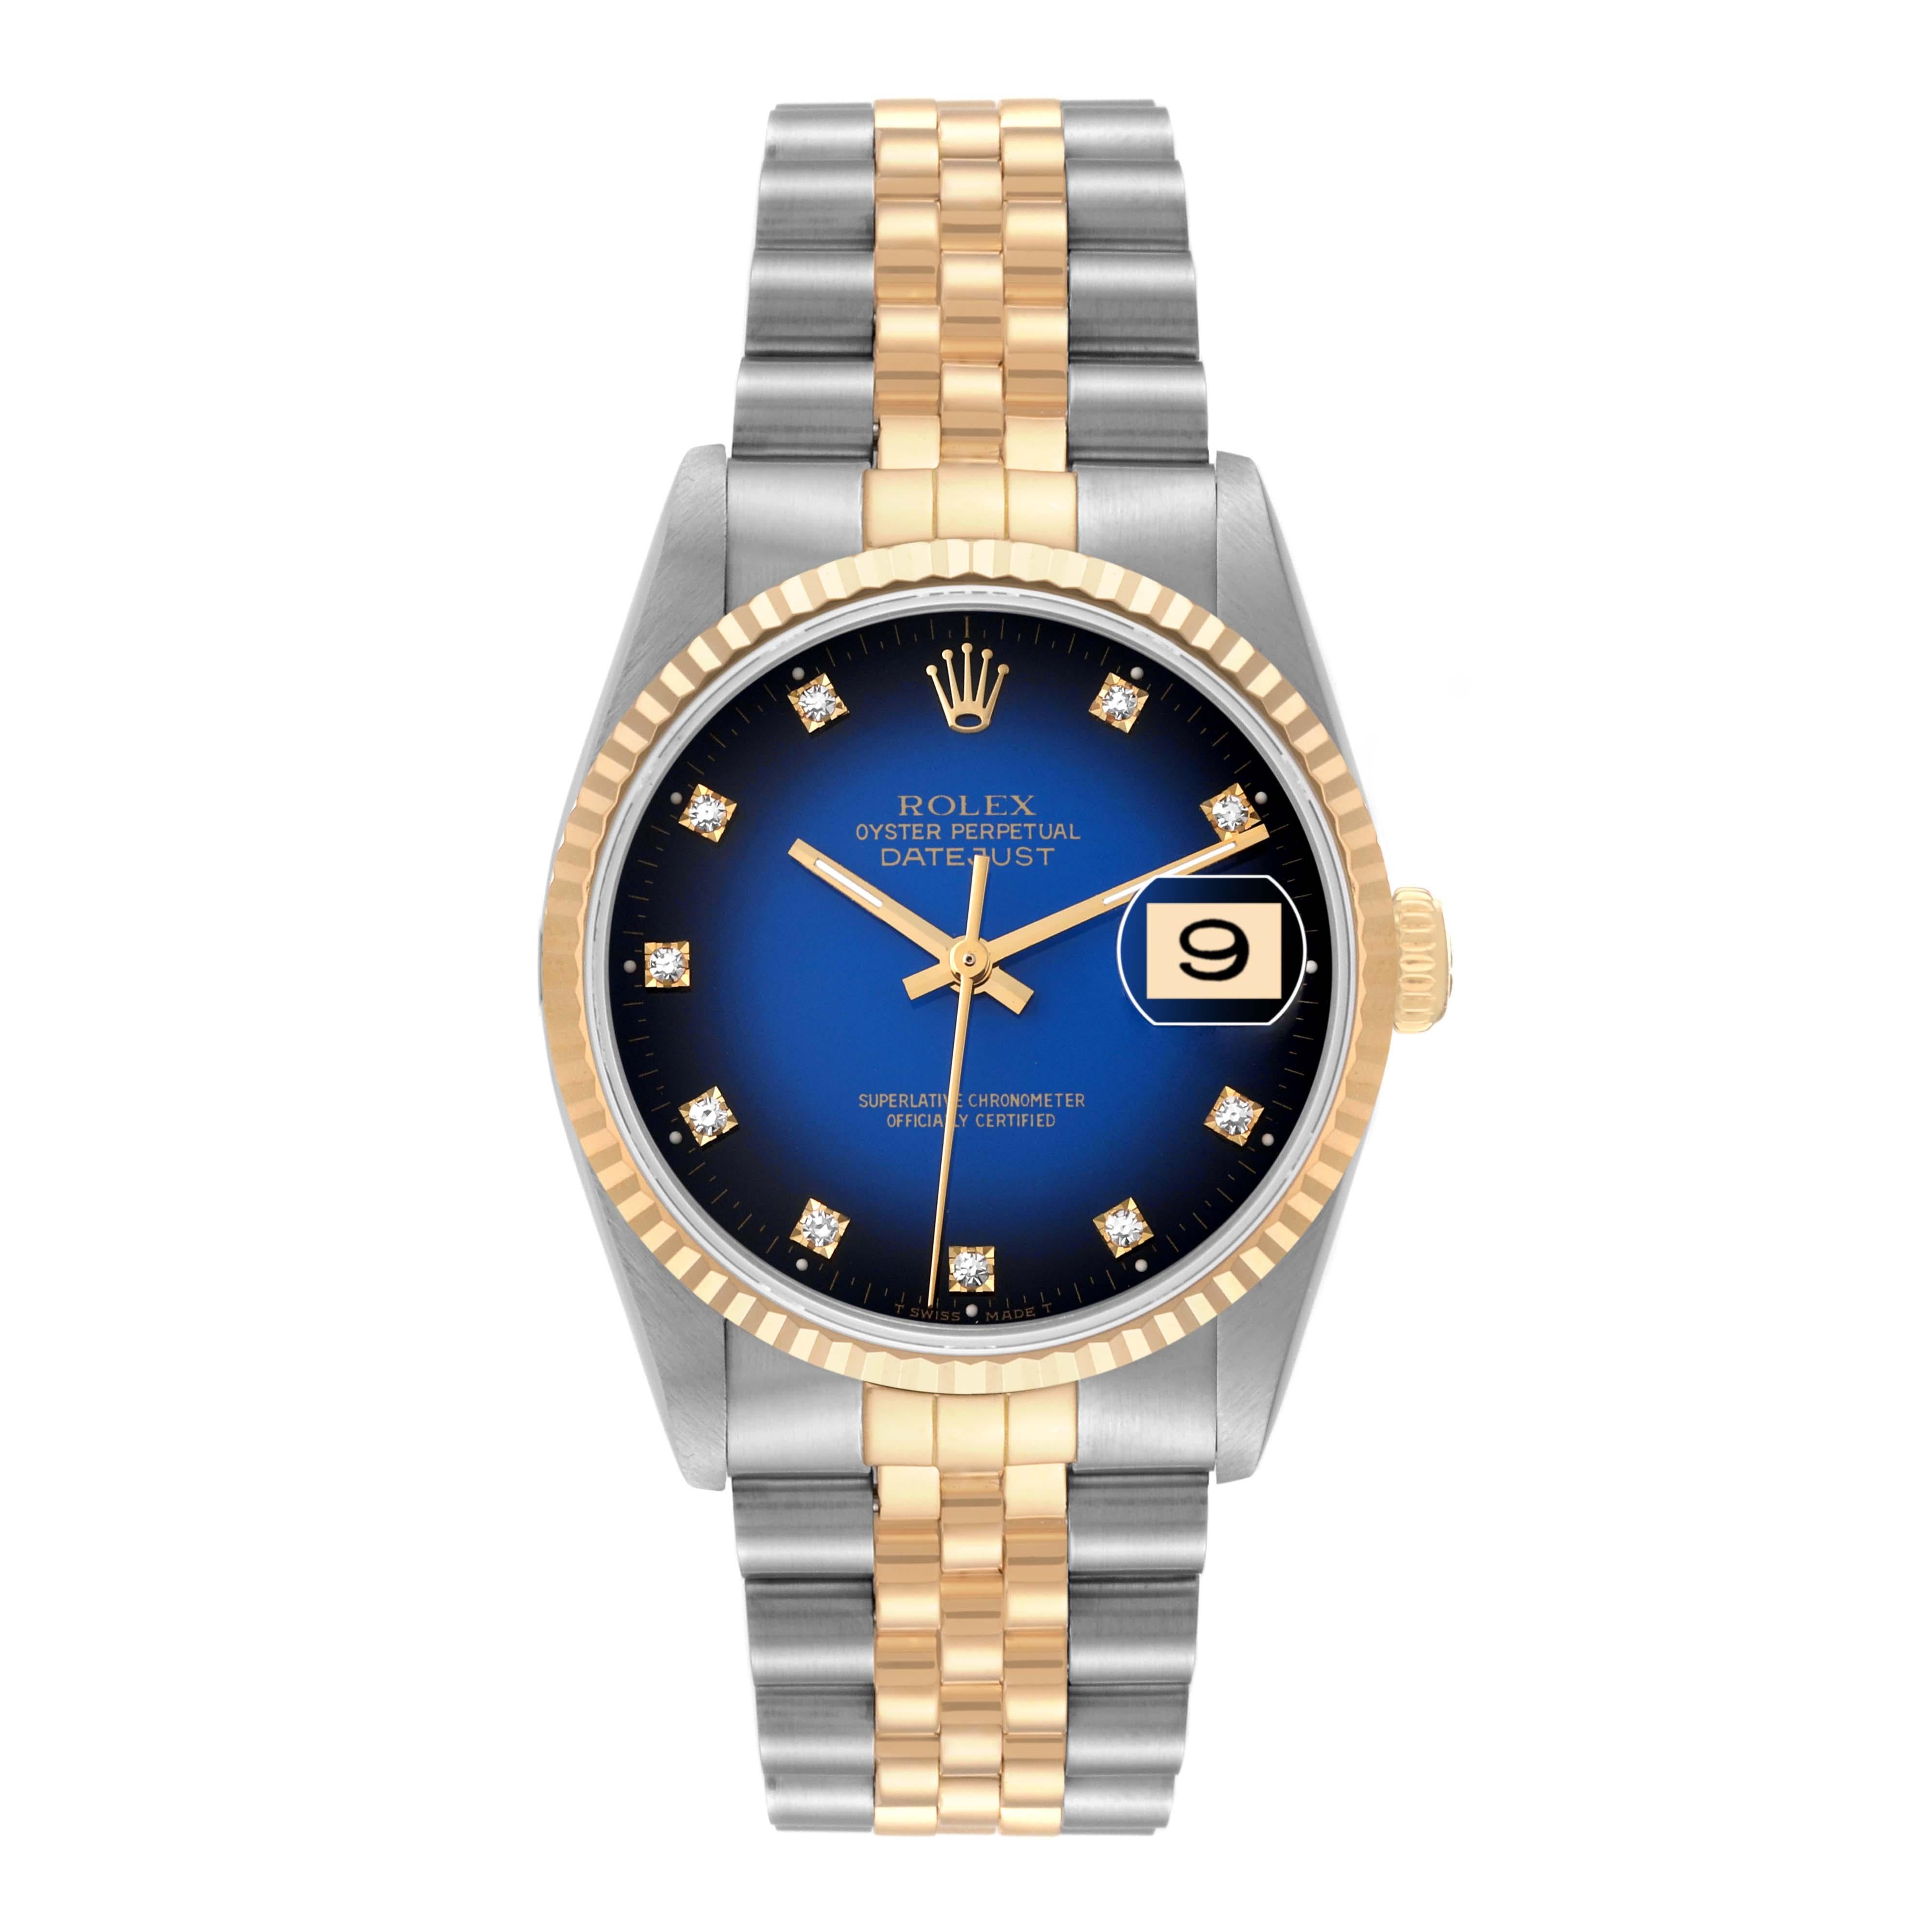 Rolex Datejust Blue Vignette Diamond Dial Steel Yellow Gold Mens Watch 16233 Box Papers. Officially certified chronometer automatic self-winding movement. Stainless steel case 36.0 mm in diameter.  Rolex logo on an 18K yellow gold crown. 18k yellow